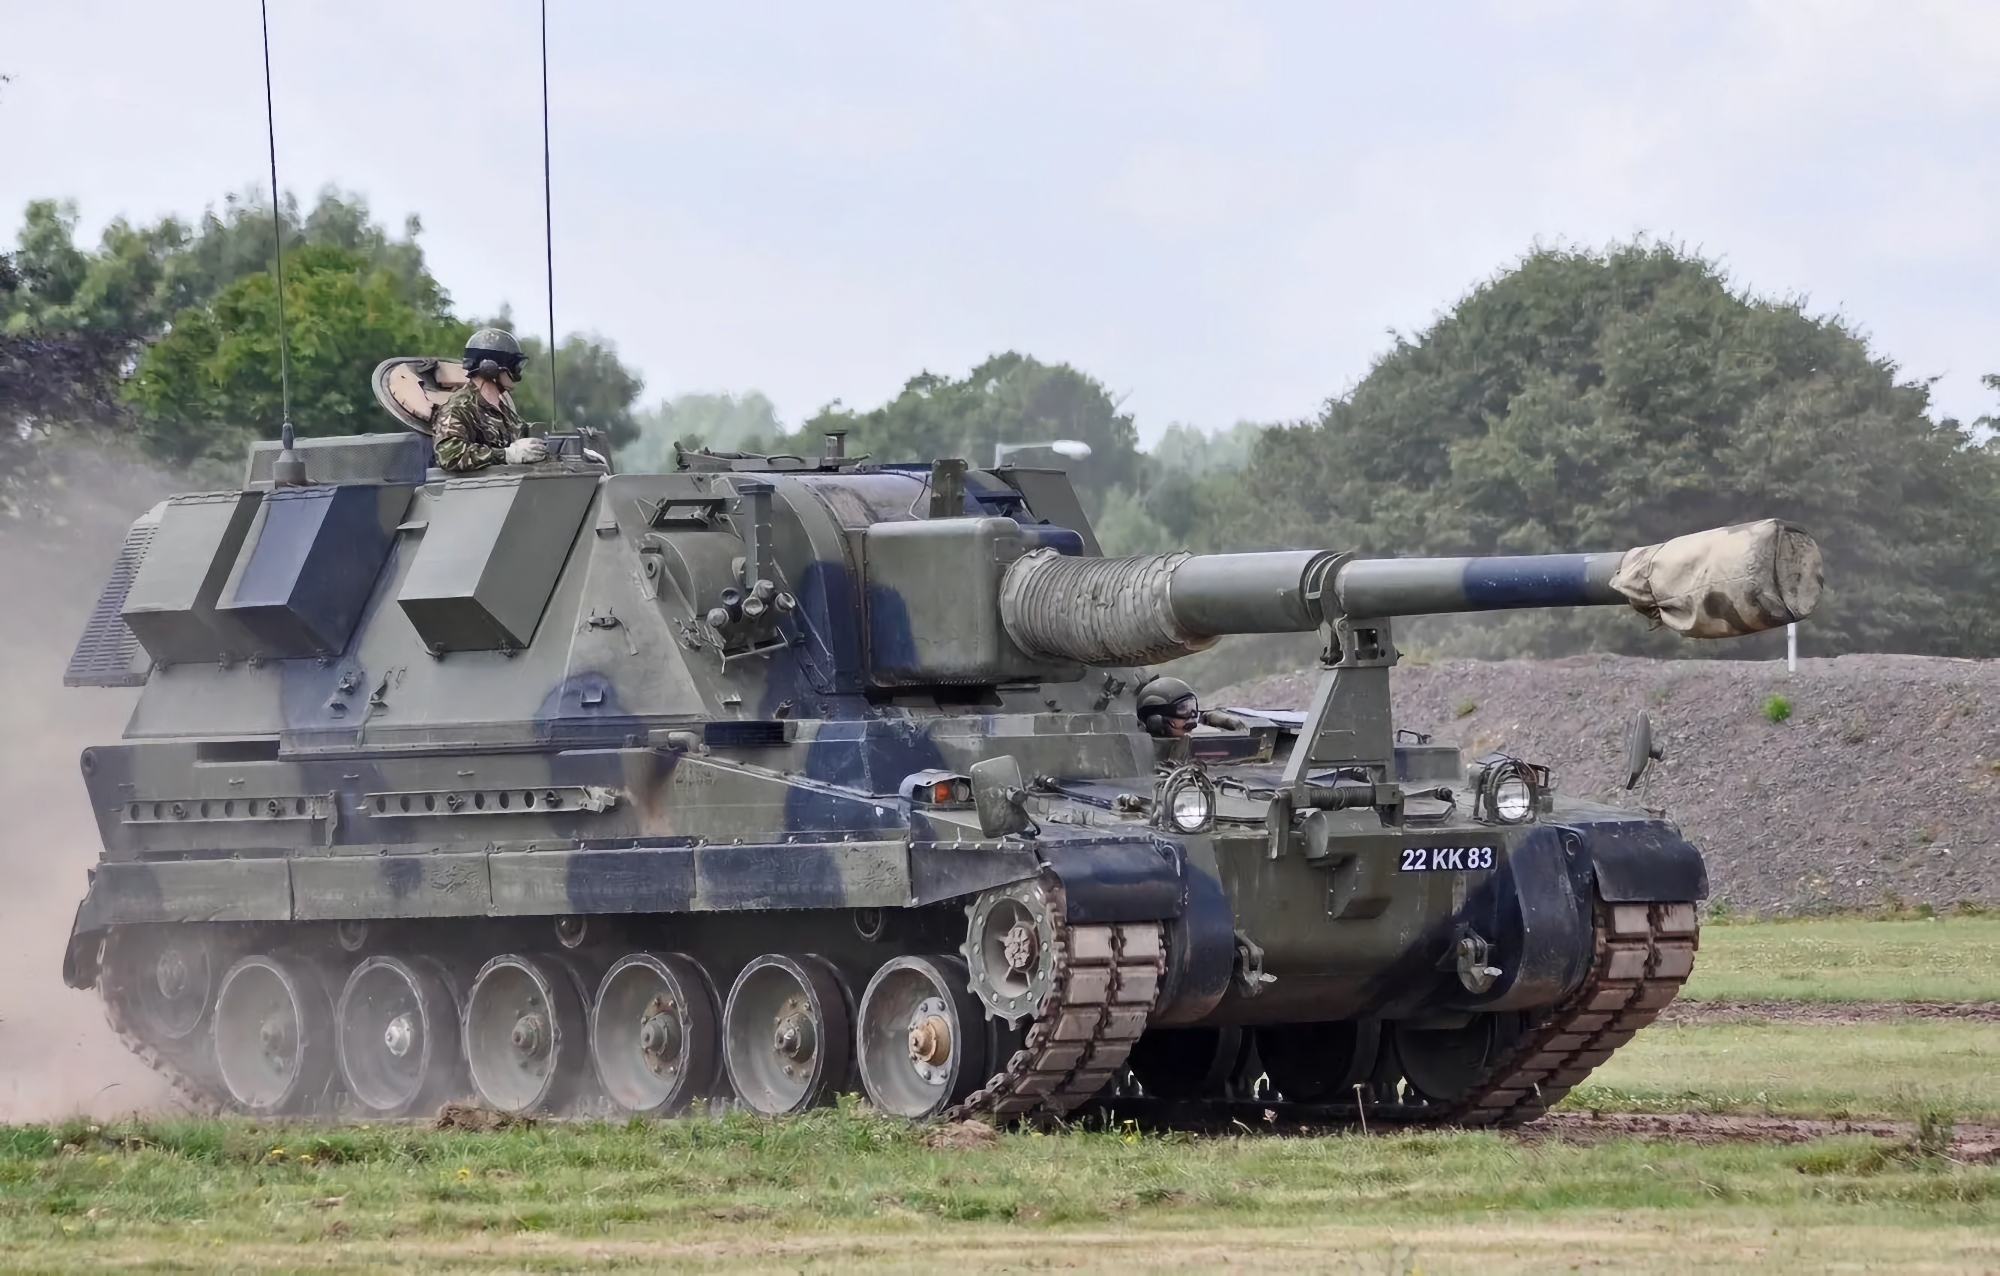 Ukrainian Armed Forces showcase British AS-90 self-propelled howitzers for the first time